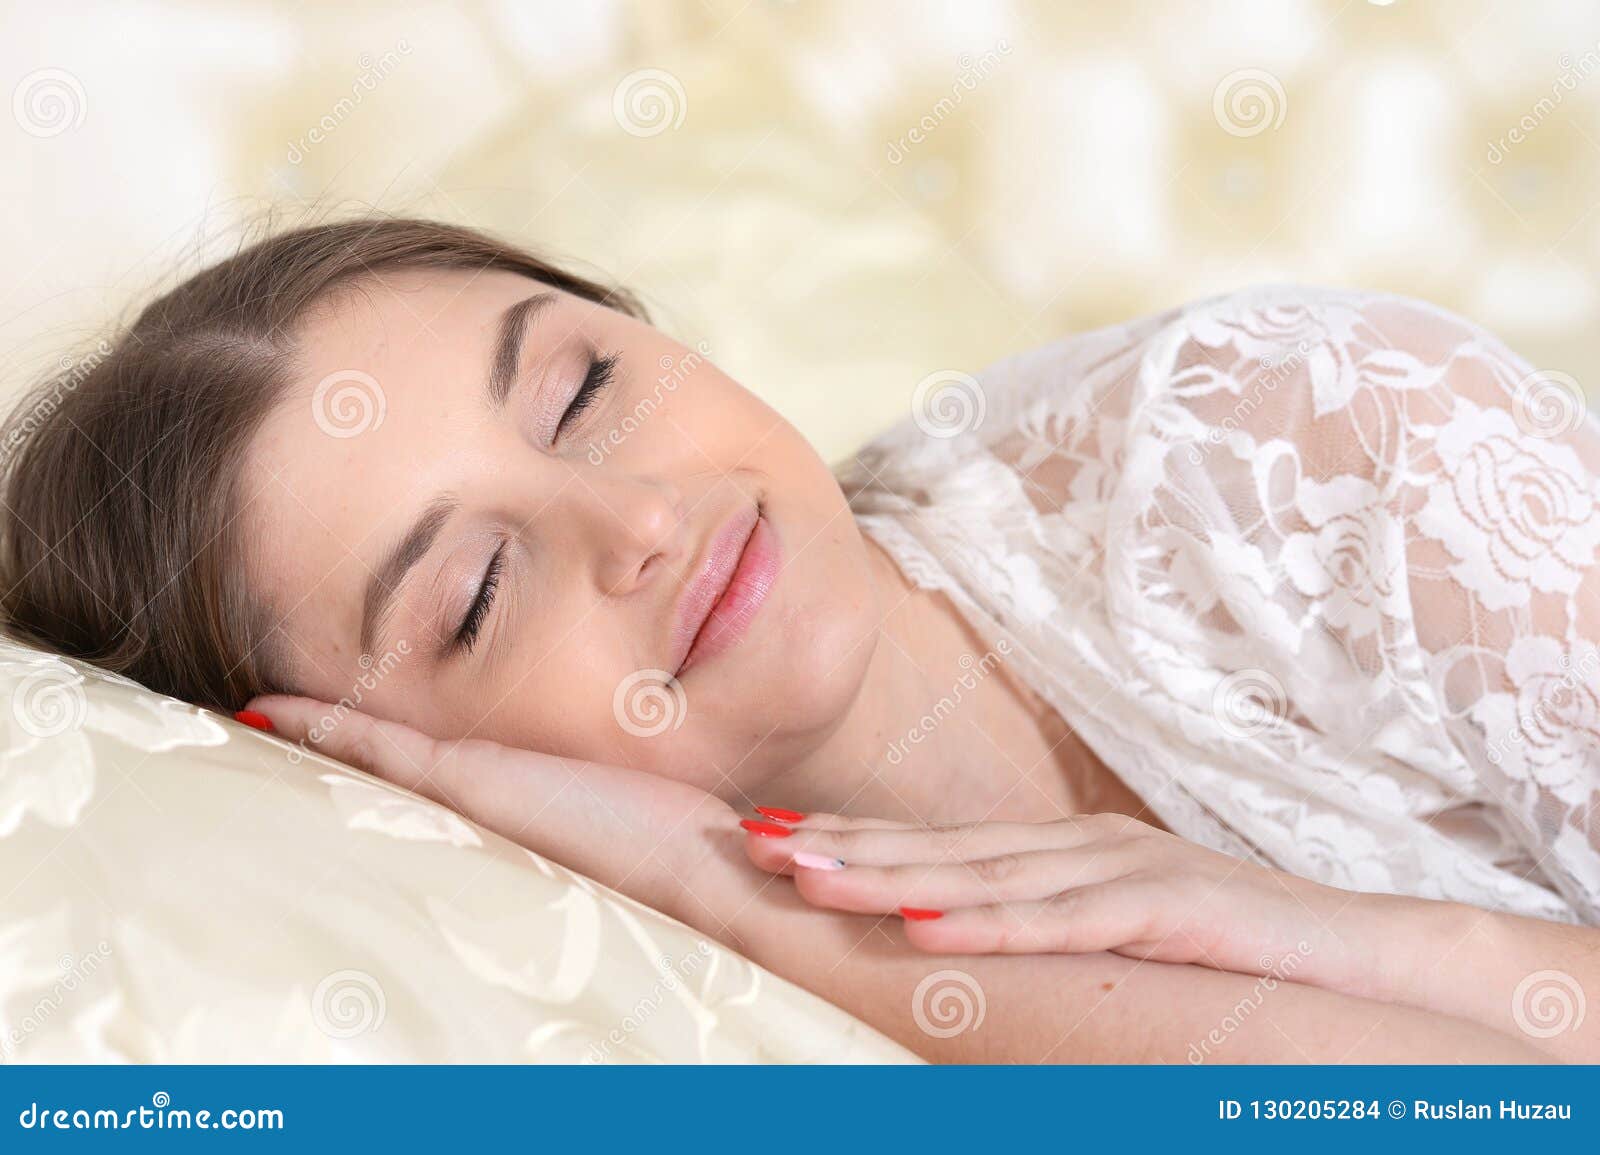 Portrait Of A Beautiful Young Woman Sleeping In Bed Stock Photo Image